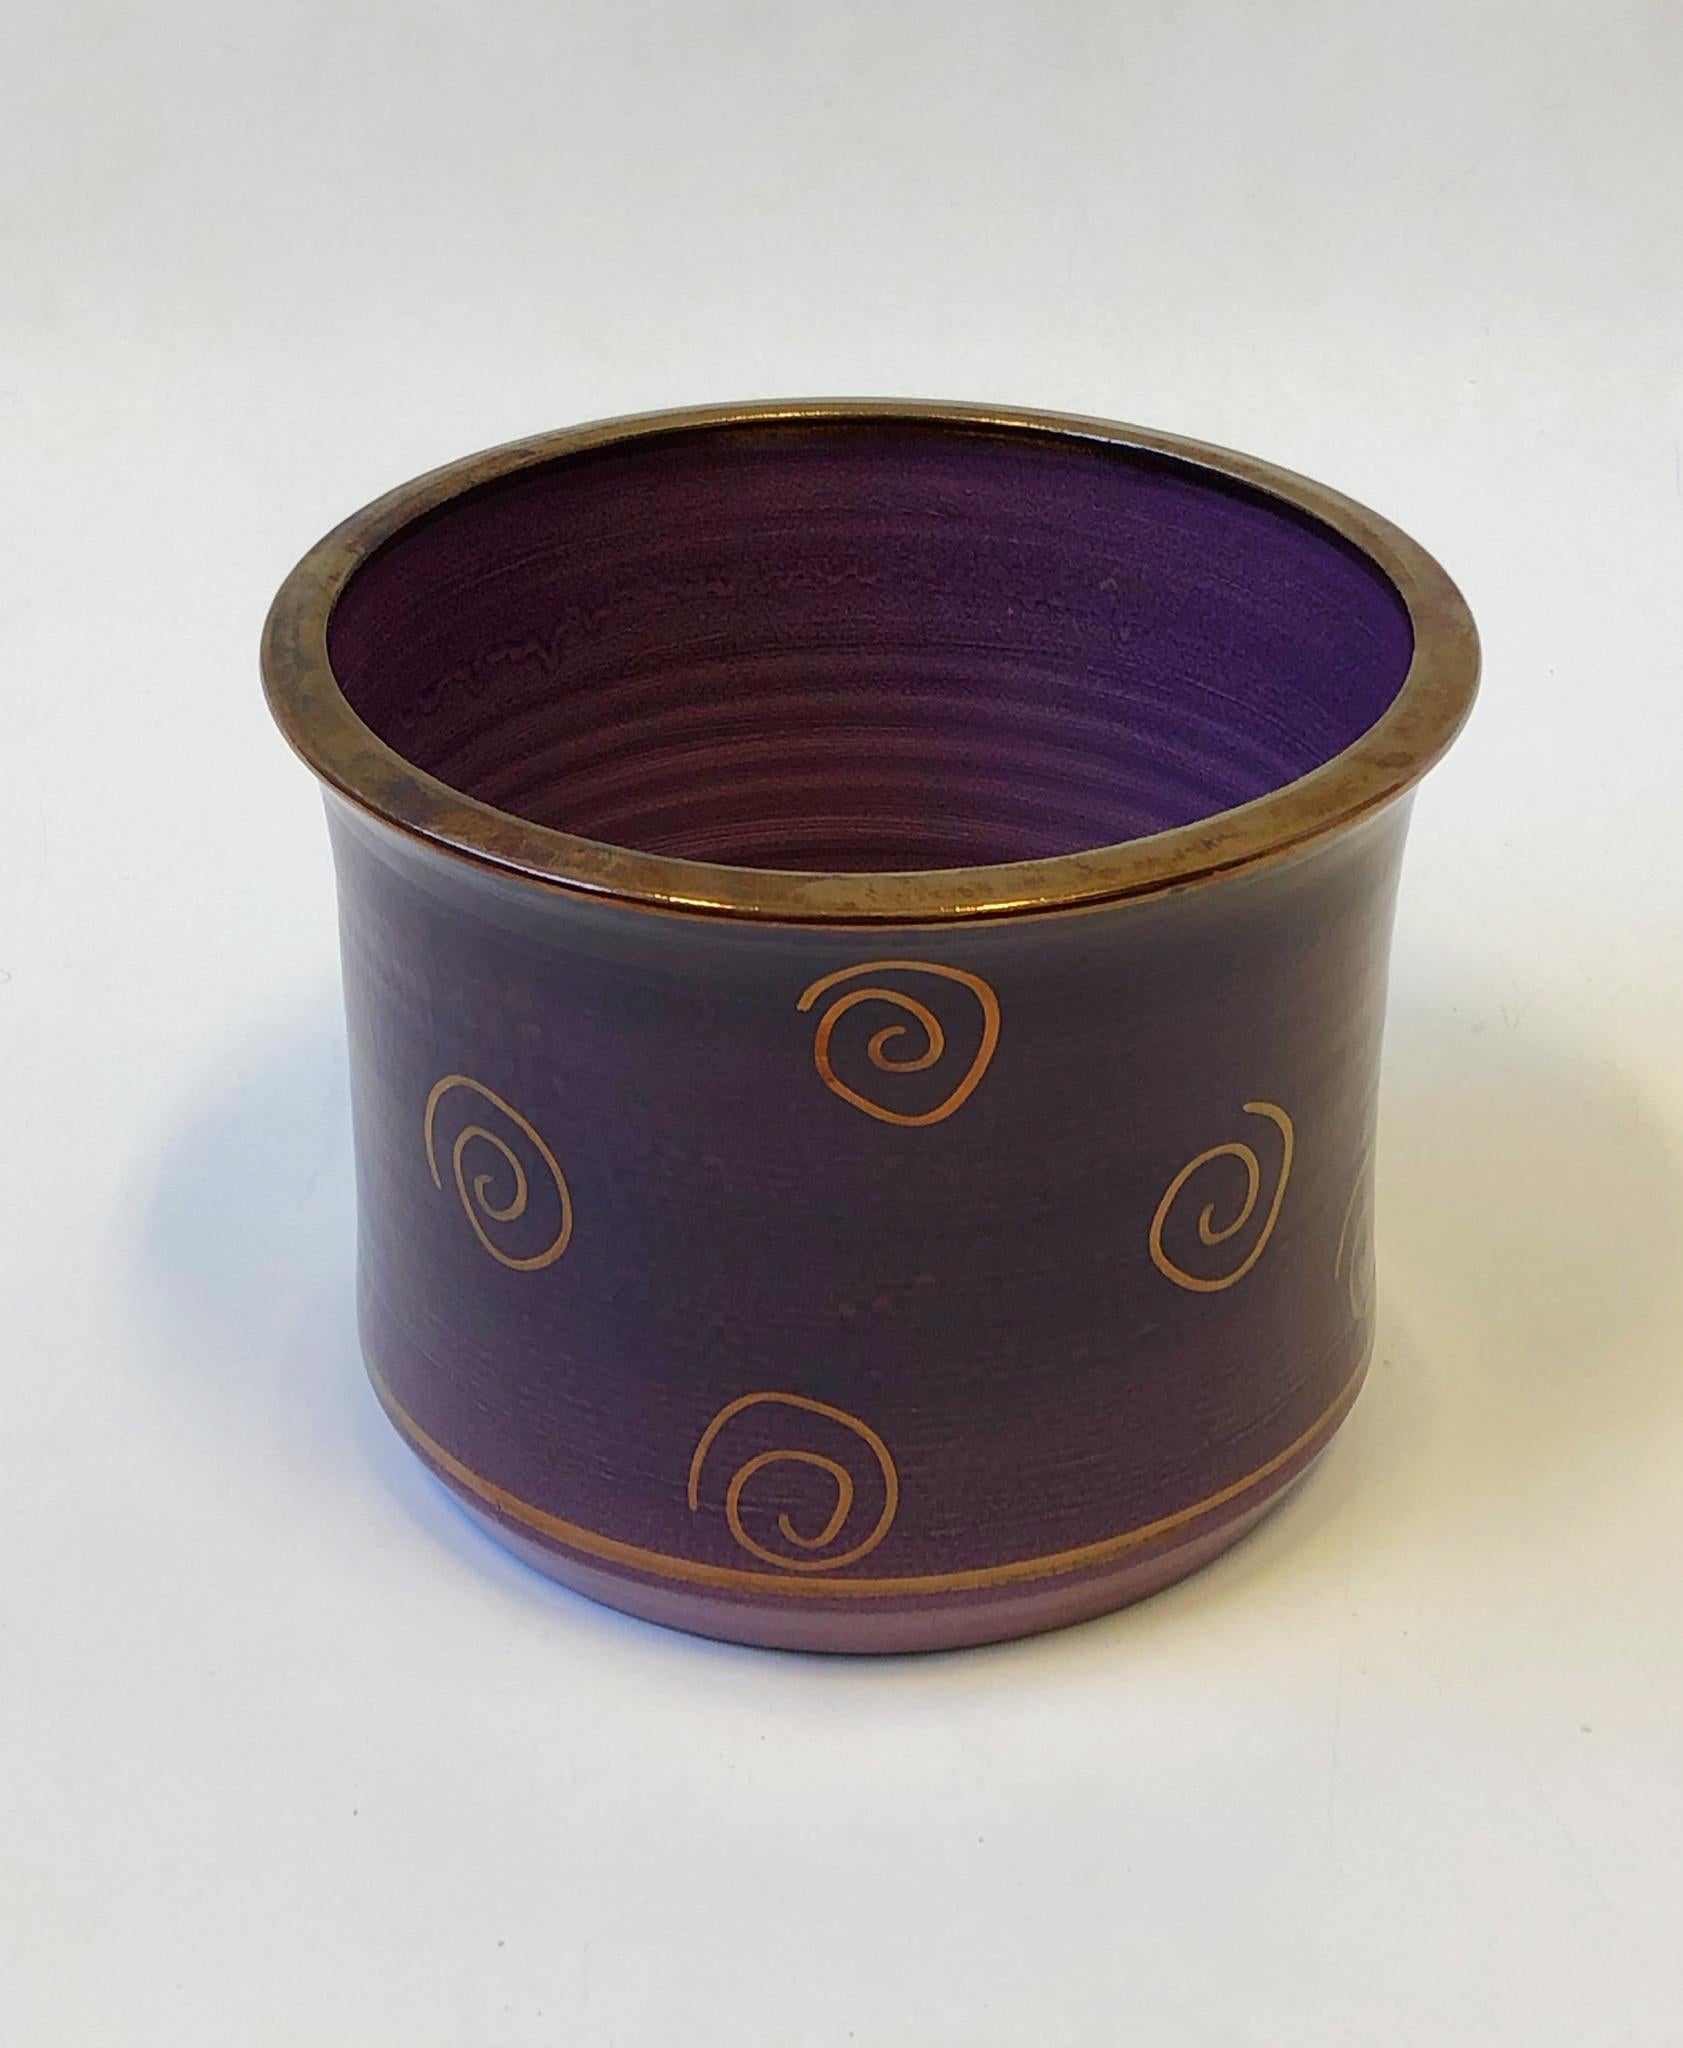 1980’s Studio ceramic planter or cachepot with purple and copper design glazing by Gary McCloy for Steve Chase. Hand signed and marked exclusively for Steve Chase. Price is just for one planter, other one is in a separate listings. 
Measurements: